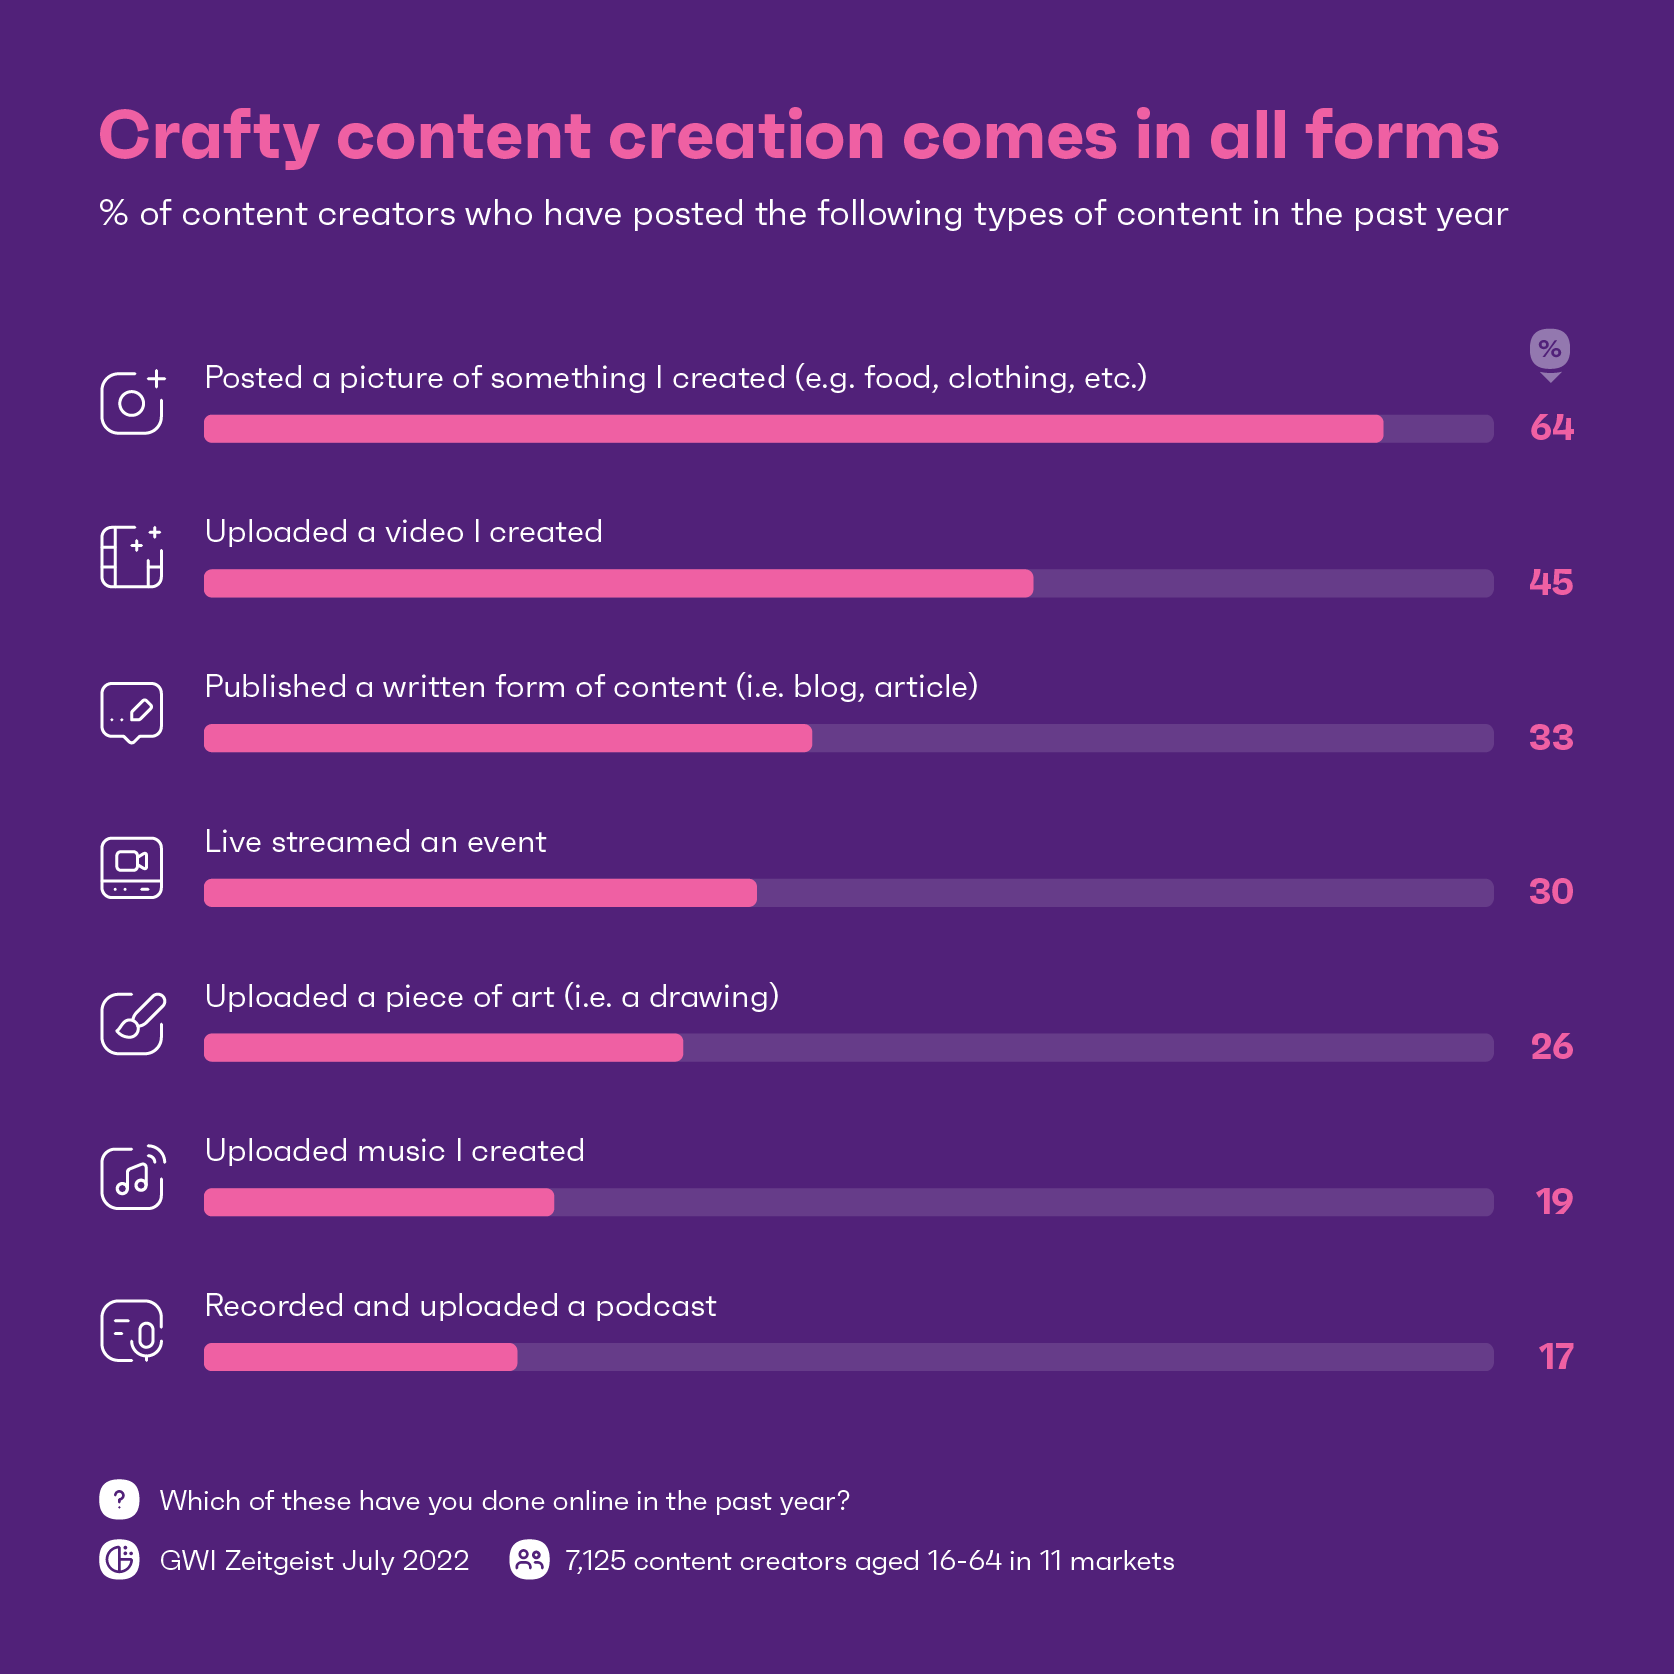 Chart showing types of content posted by content creators